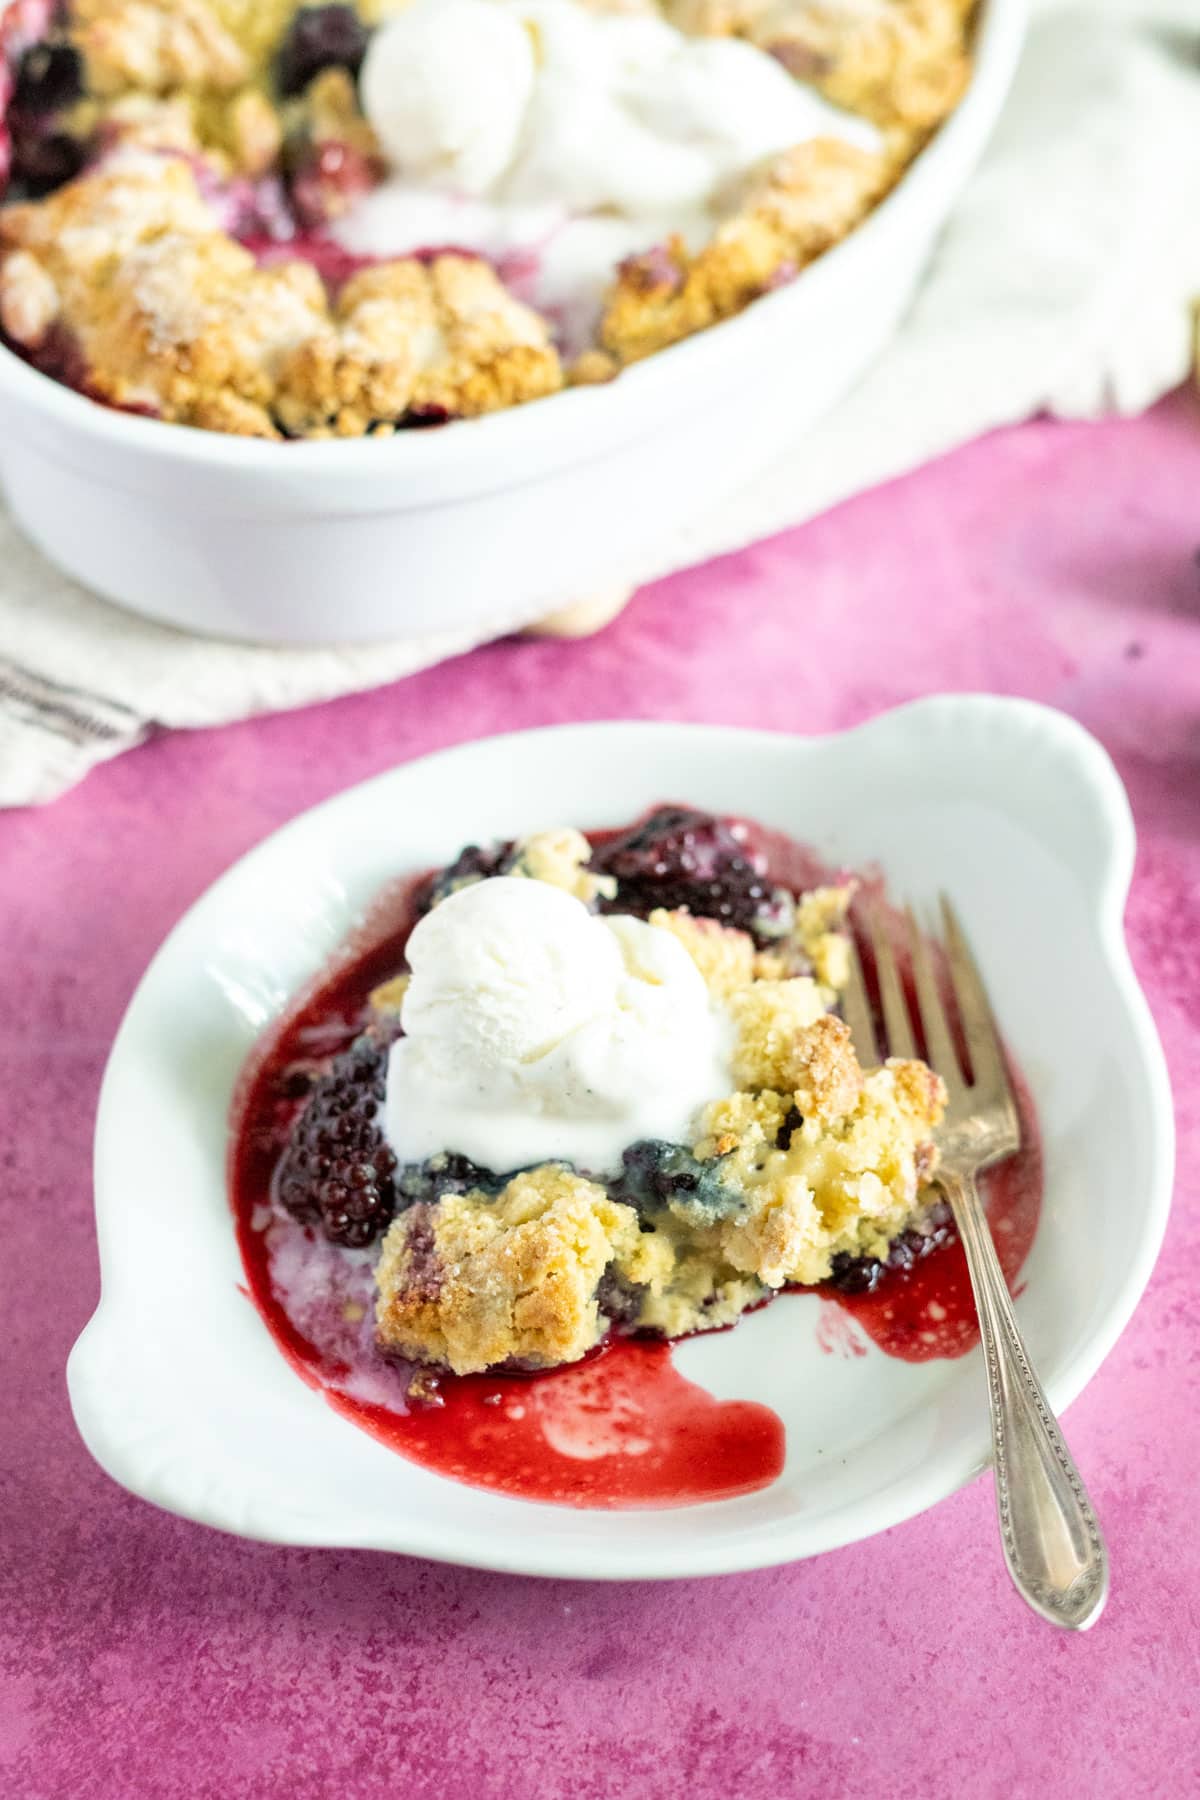 Serving of gluten free cobbler on a plate with a scoop of ice cream and a fork.